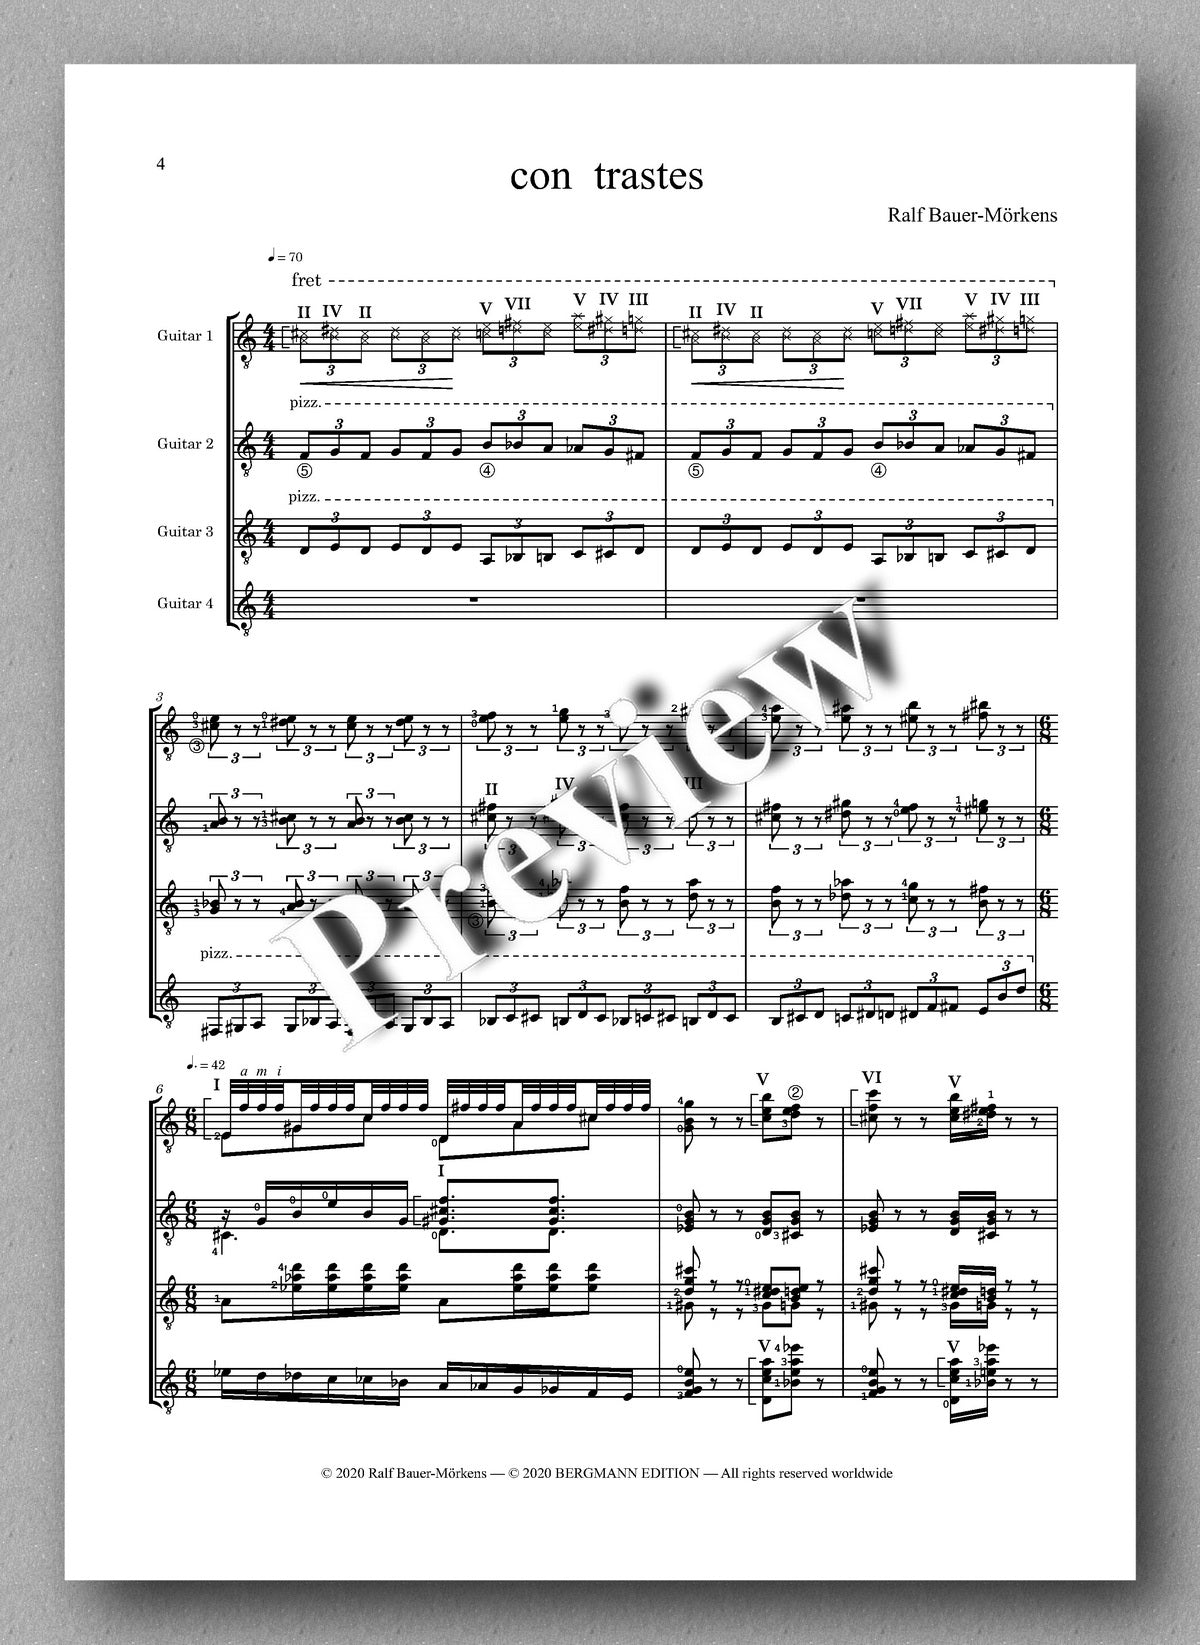 "Con Trastes" by Ralf Bauer-Mörkens - preview of the music score 1